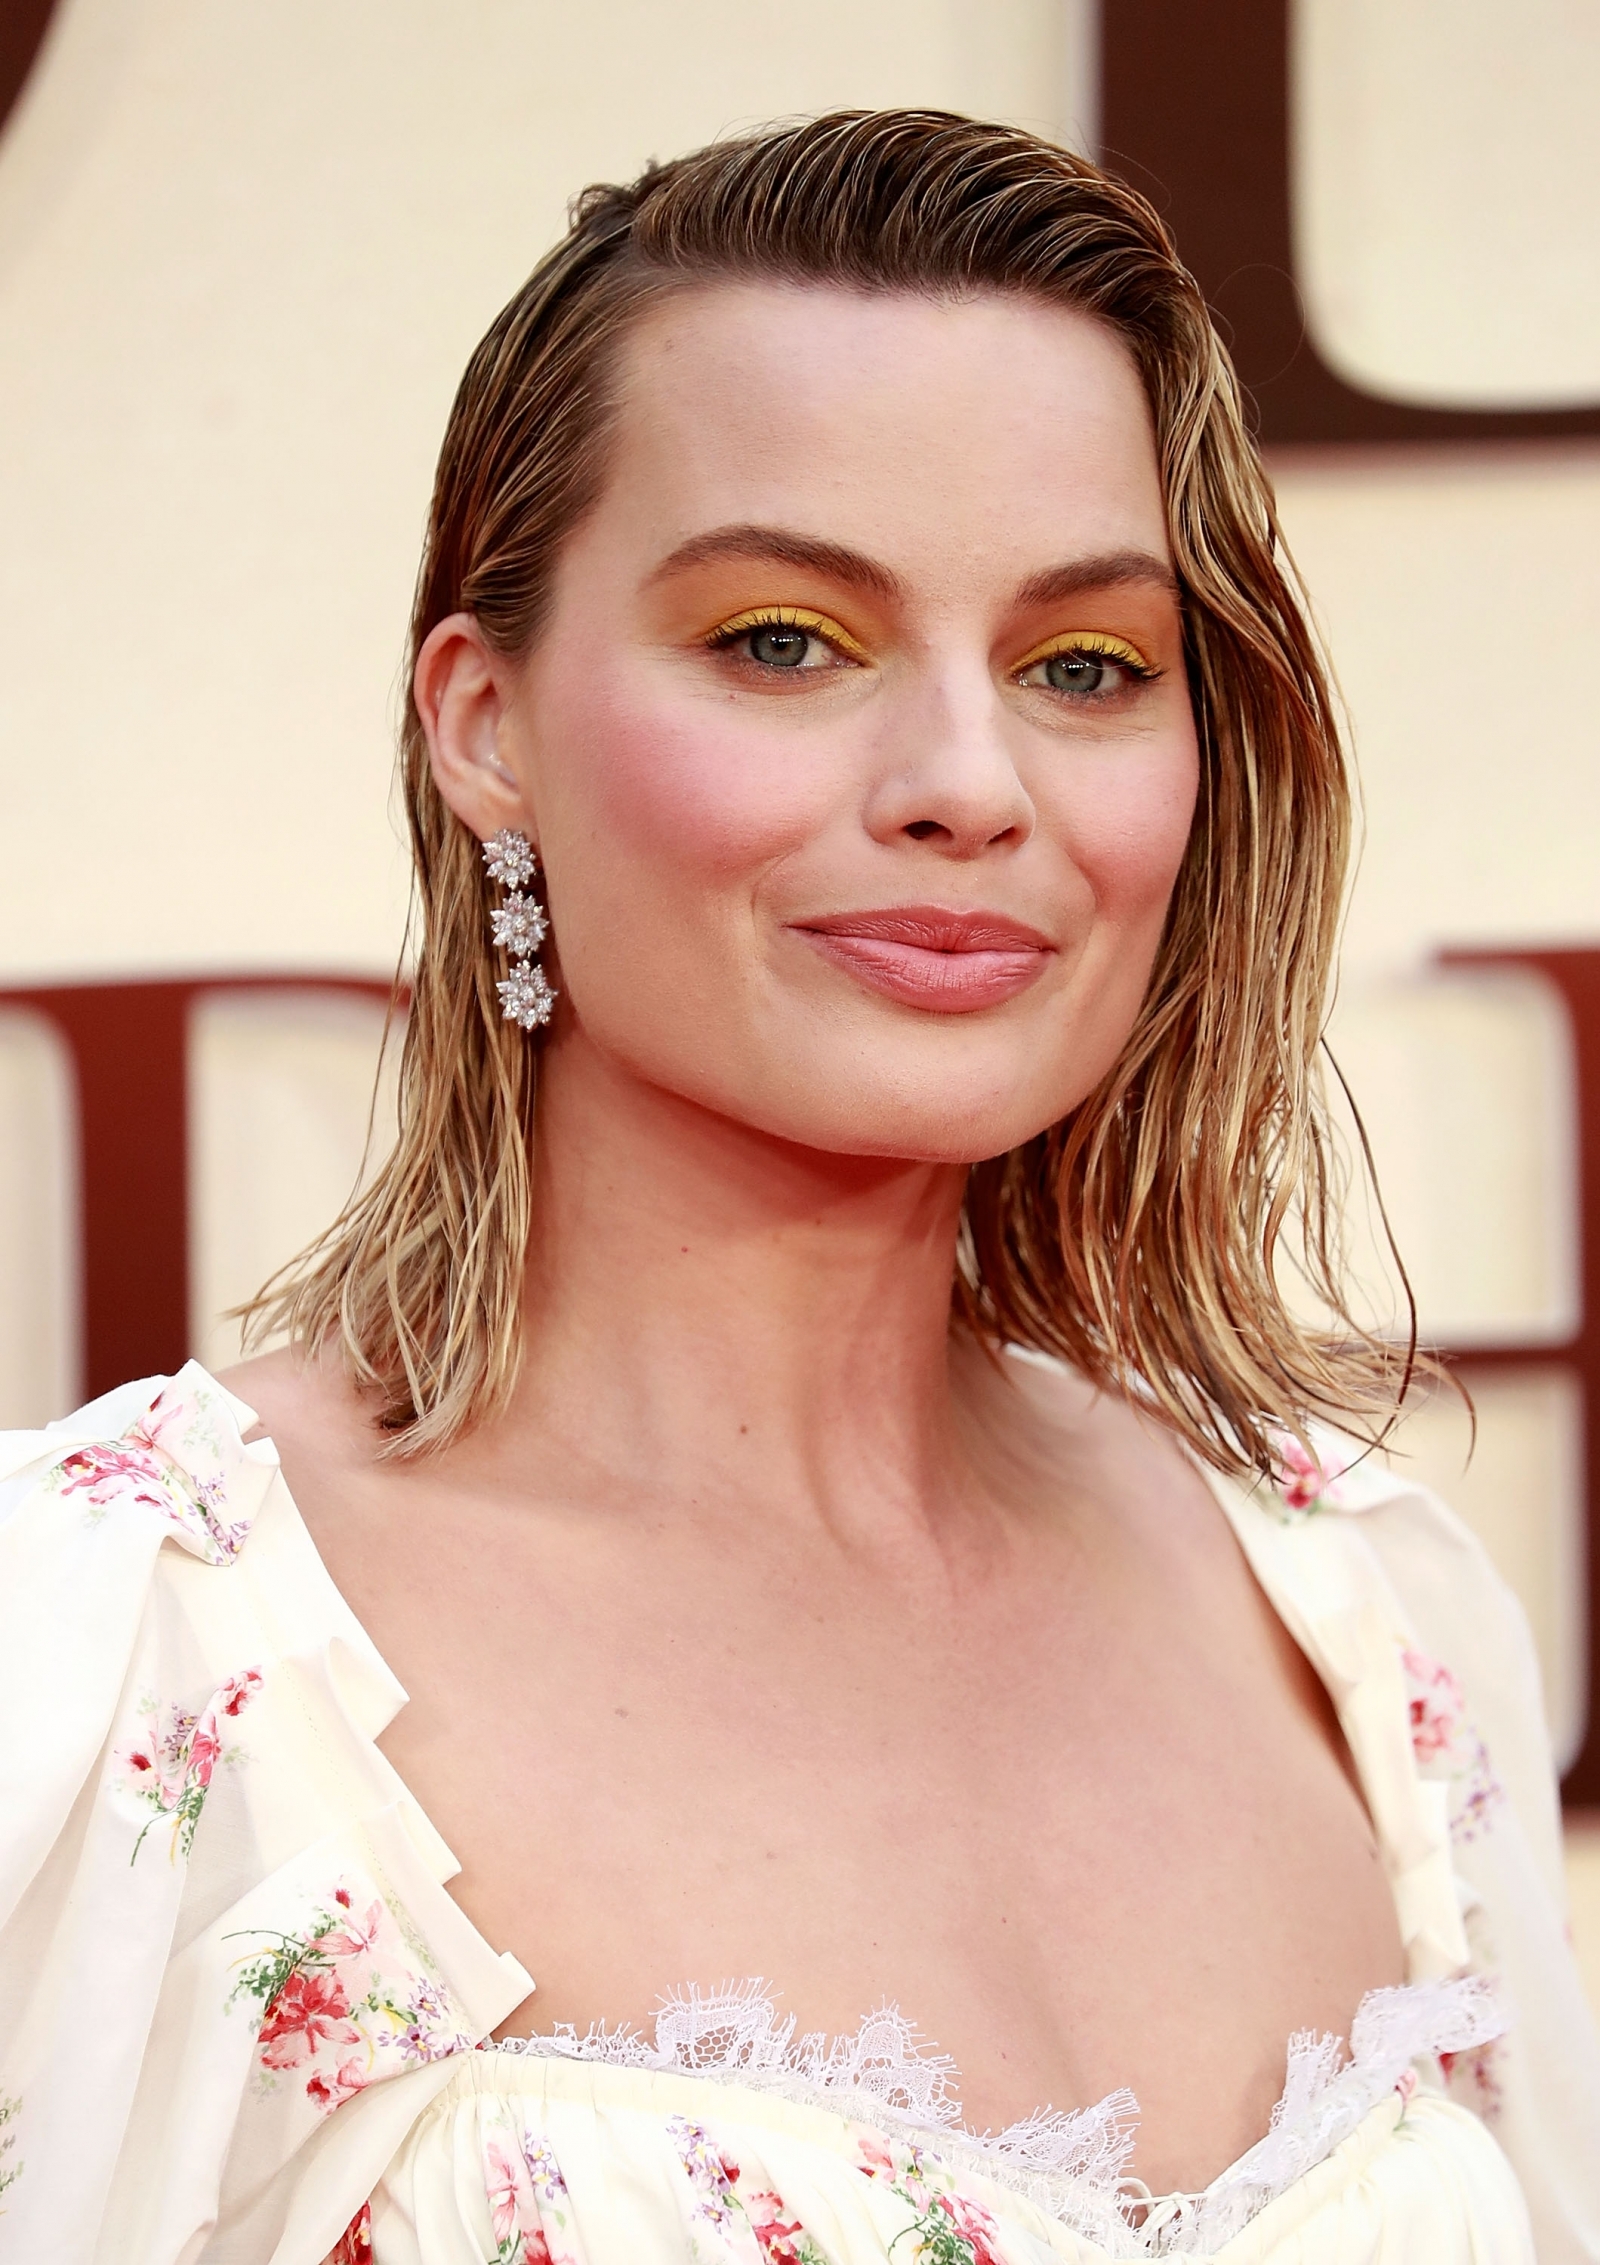 Margot Robbie delights her fans on the red carpet at I, Tonya screening